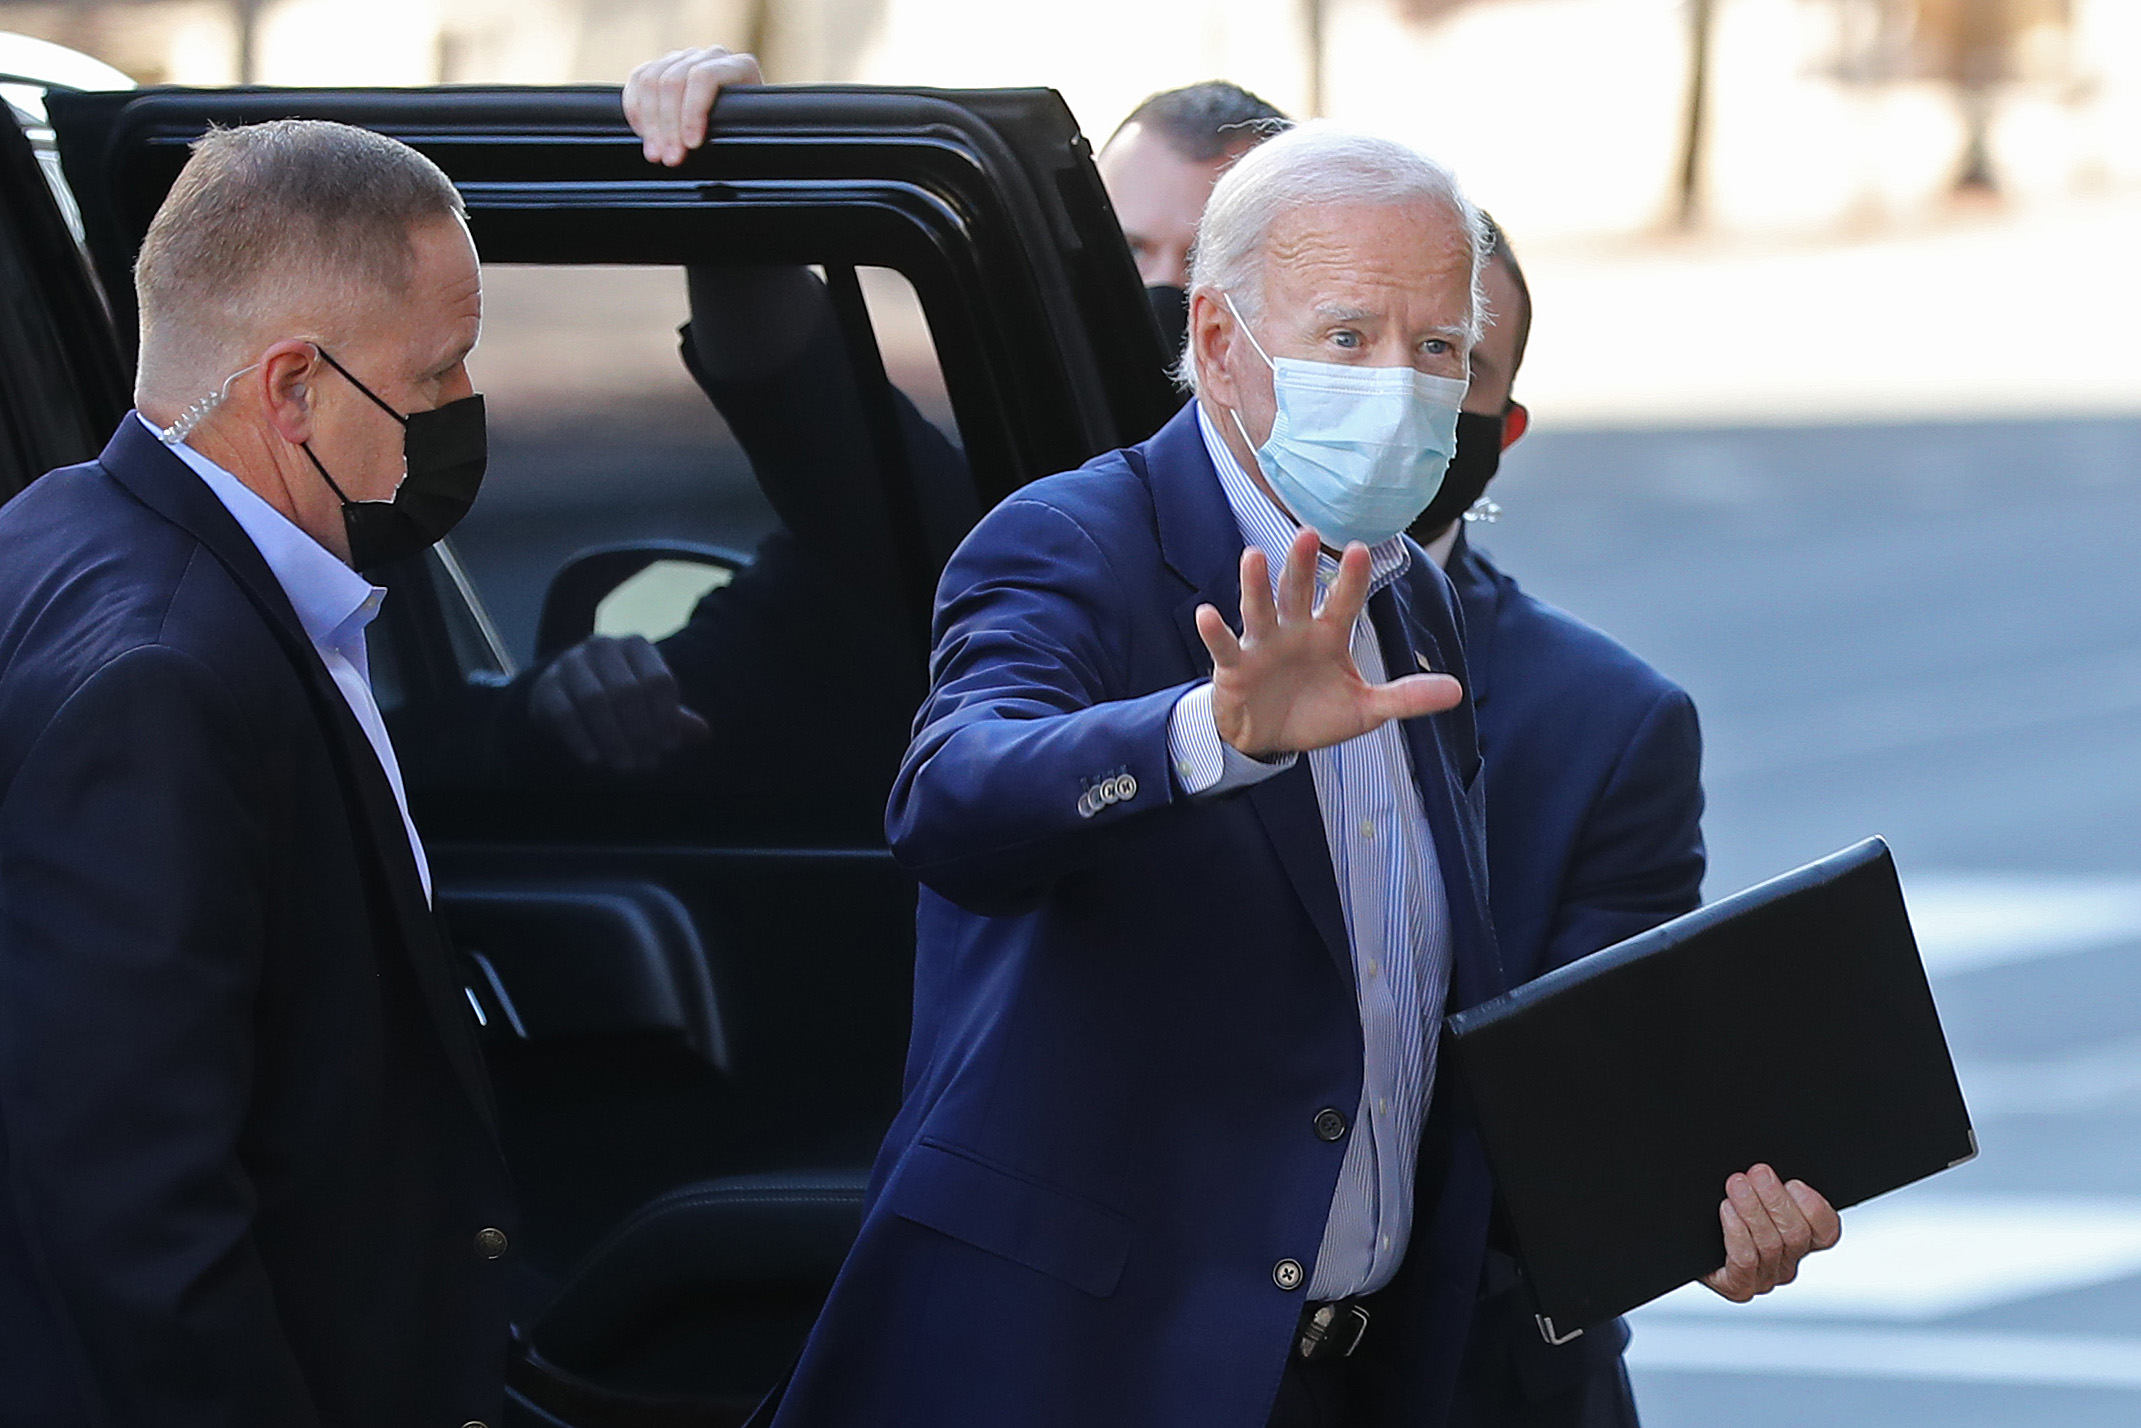 PHOTO: Wearing a face mask to reduce the risk posed by the coronavirus, Democratic presidential nominee Joe Biden waves to journalists as he enters The Queen performance venue Oct. 3, 2020, in Wilmington, Del.